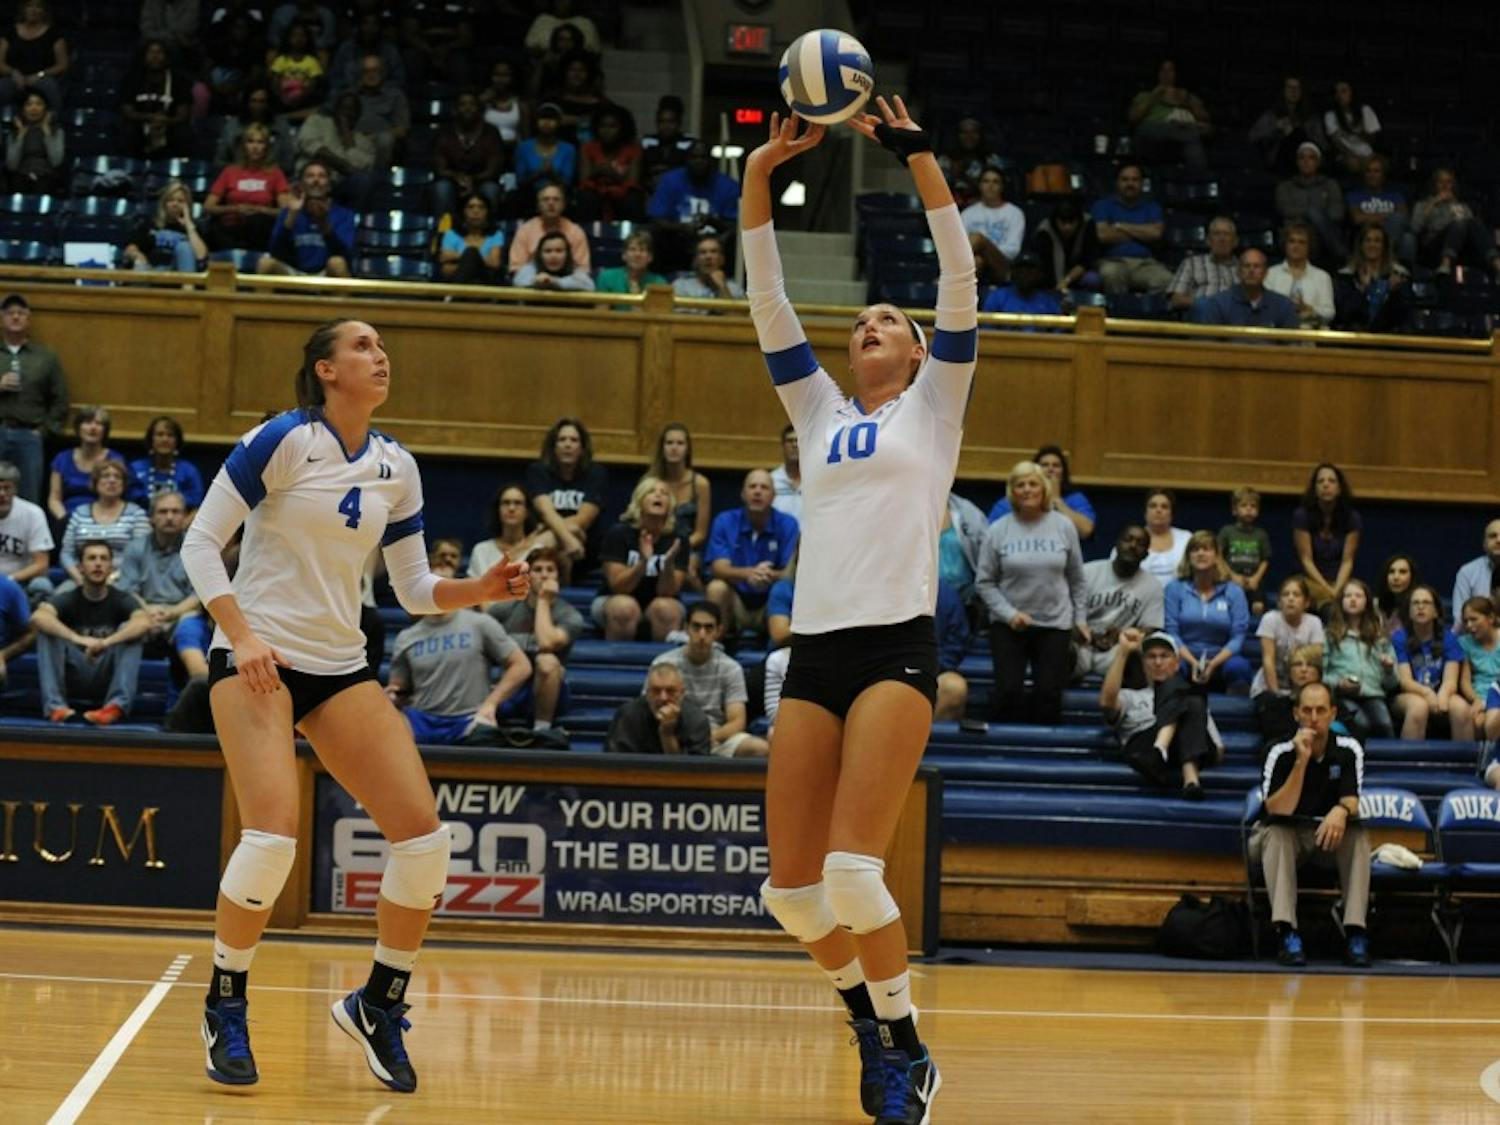 Elizabeth Campbell (right) recorded a game-high 23 kills as Duke notched a 3-1 comeback victory against Illinois.